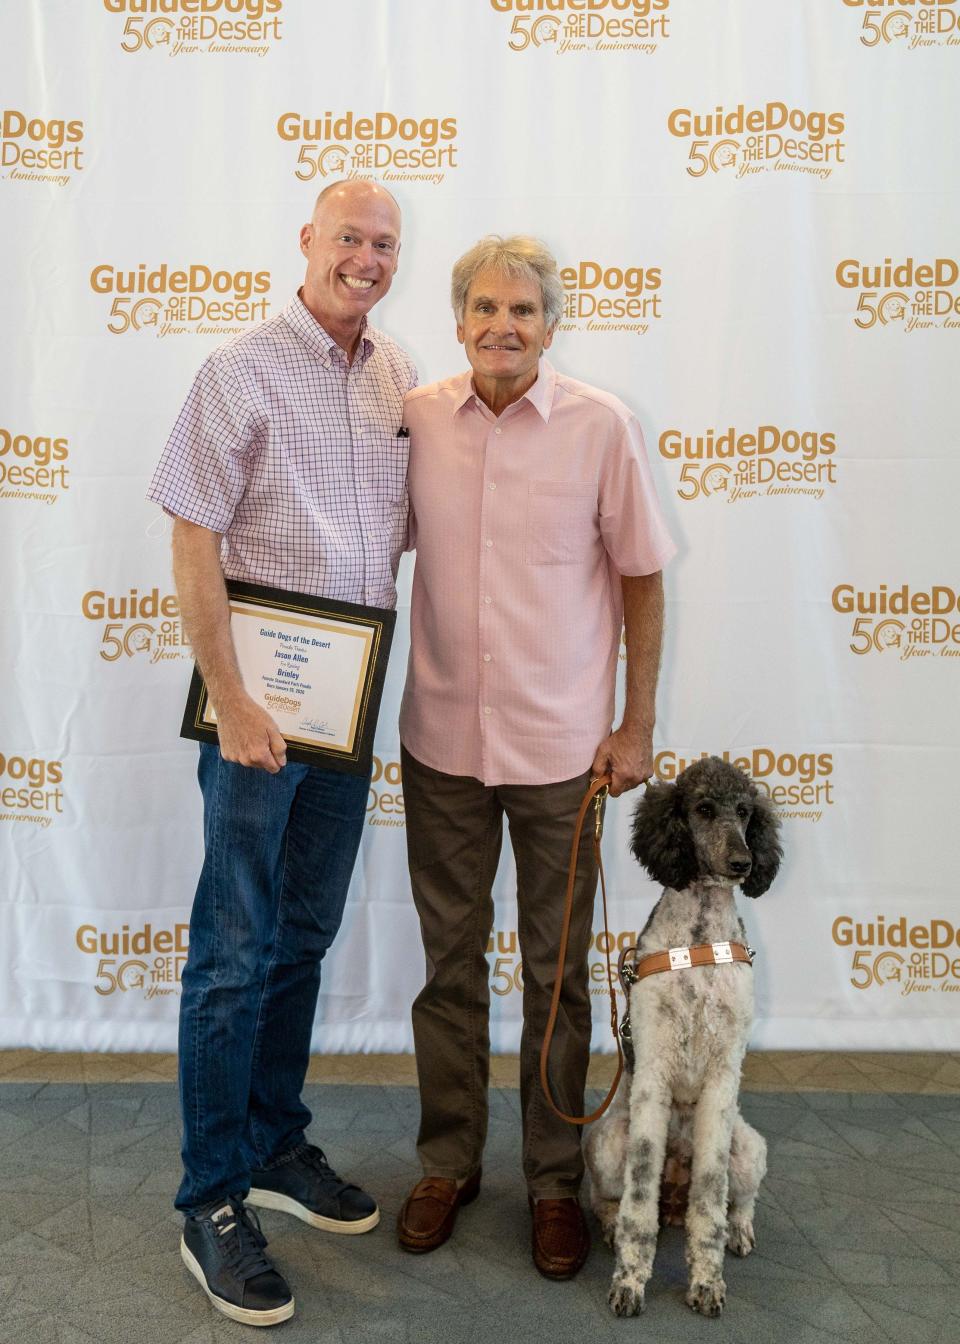 Puppy raiser Jason Allen (left) poses with student Rocky Camp and Brinley, a female parti standard poodle, at the Guide Dogs of the Desert graduation ceremony on May 21, 2022.